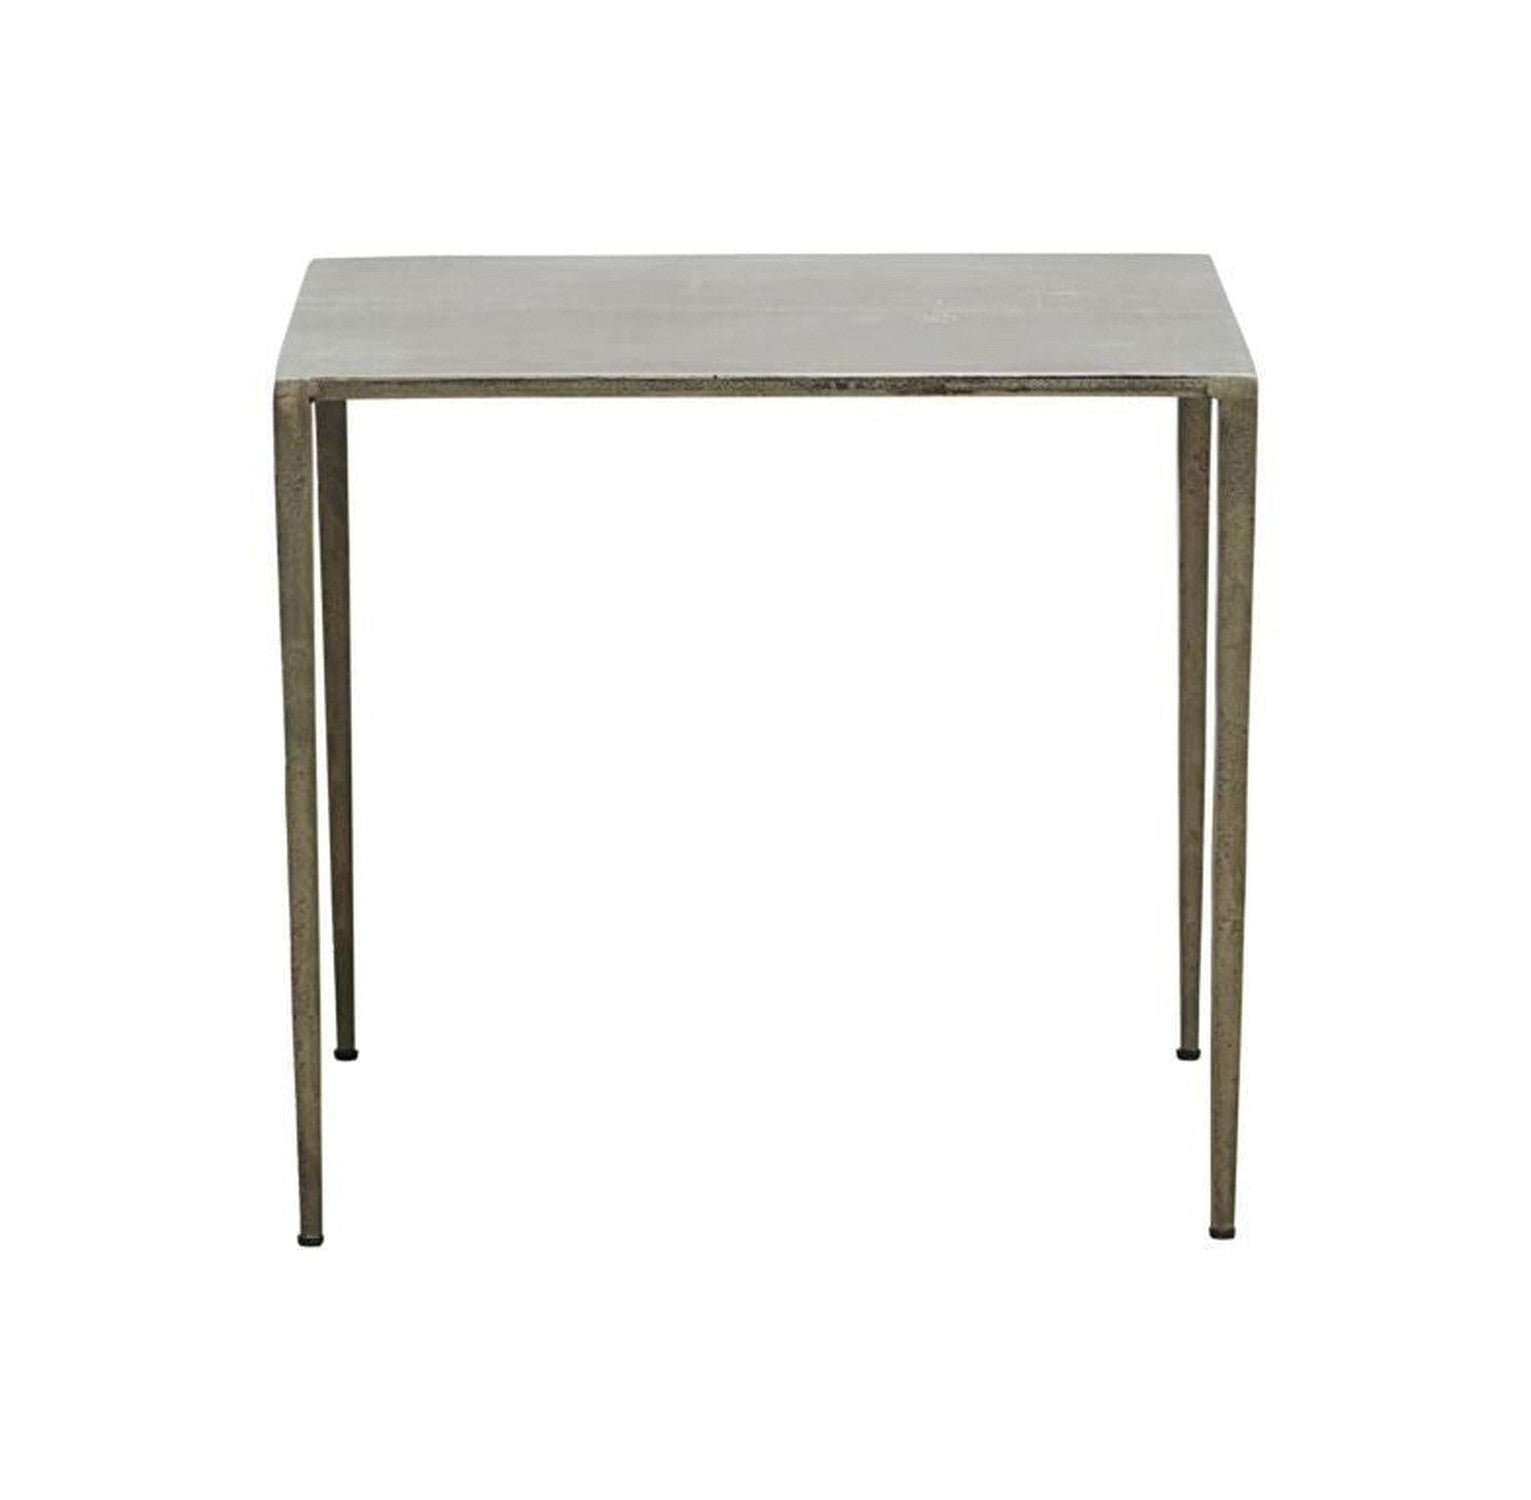 House Doctor Side table, HDRanchi, Antique grey